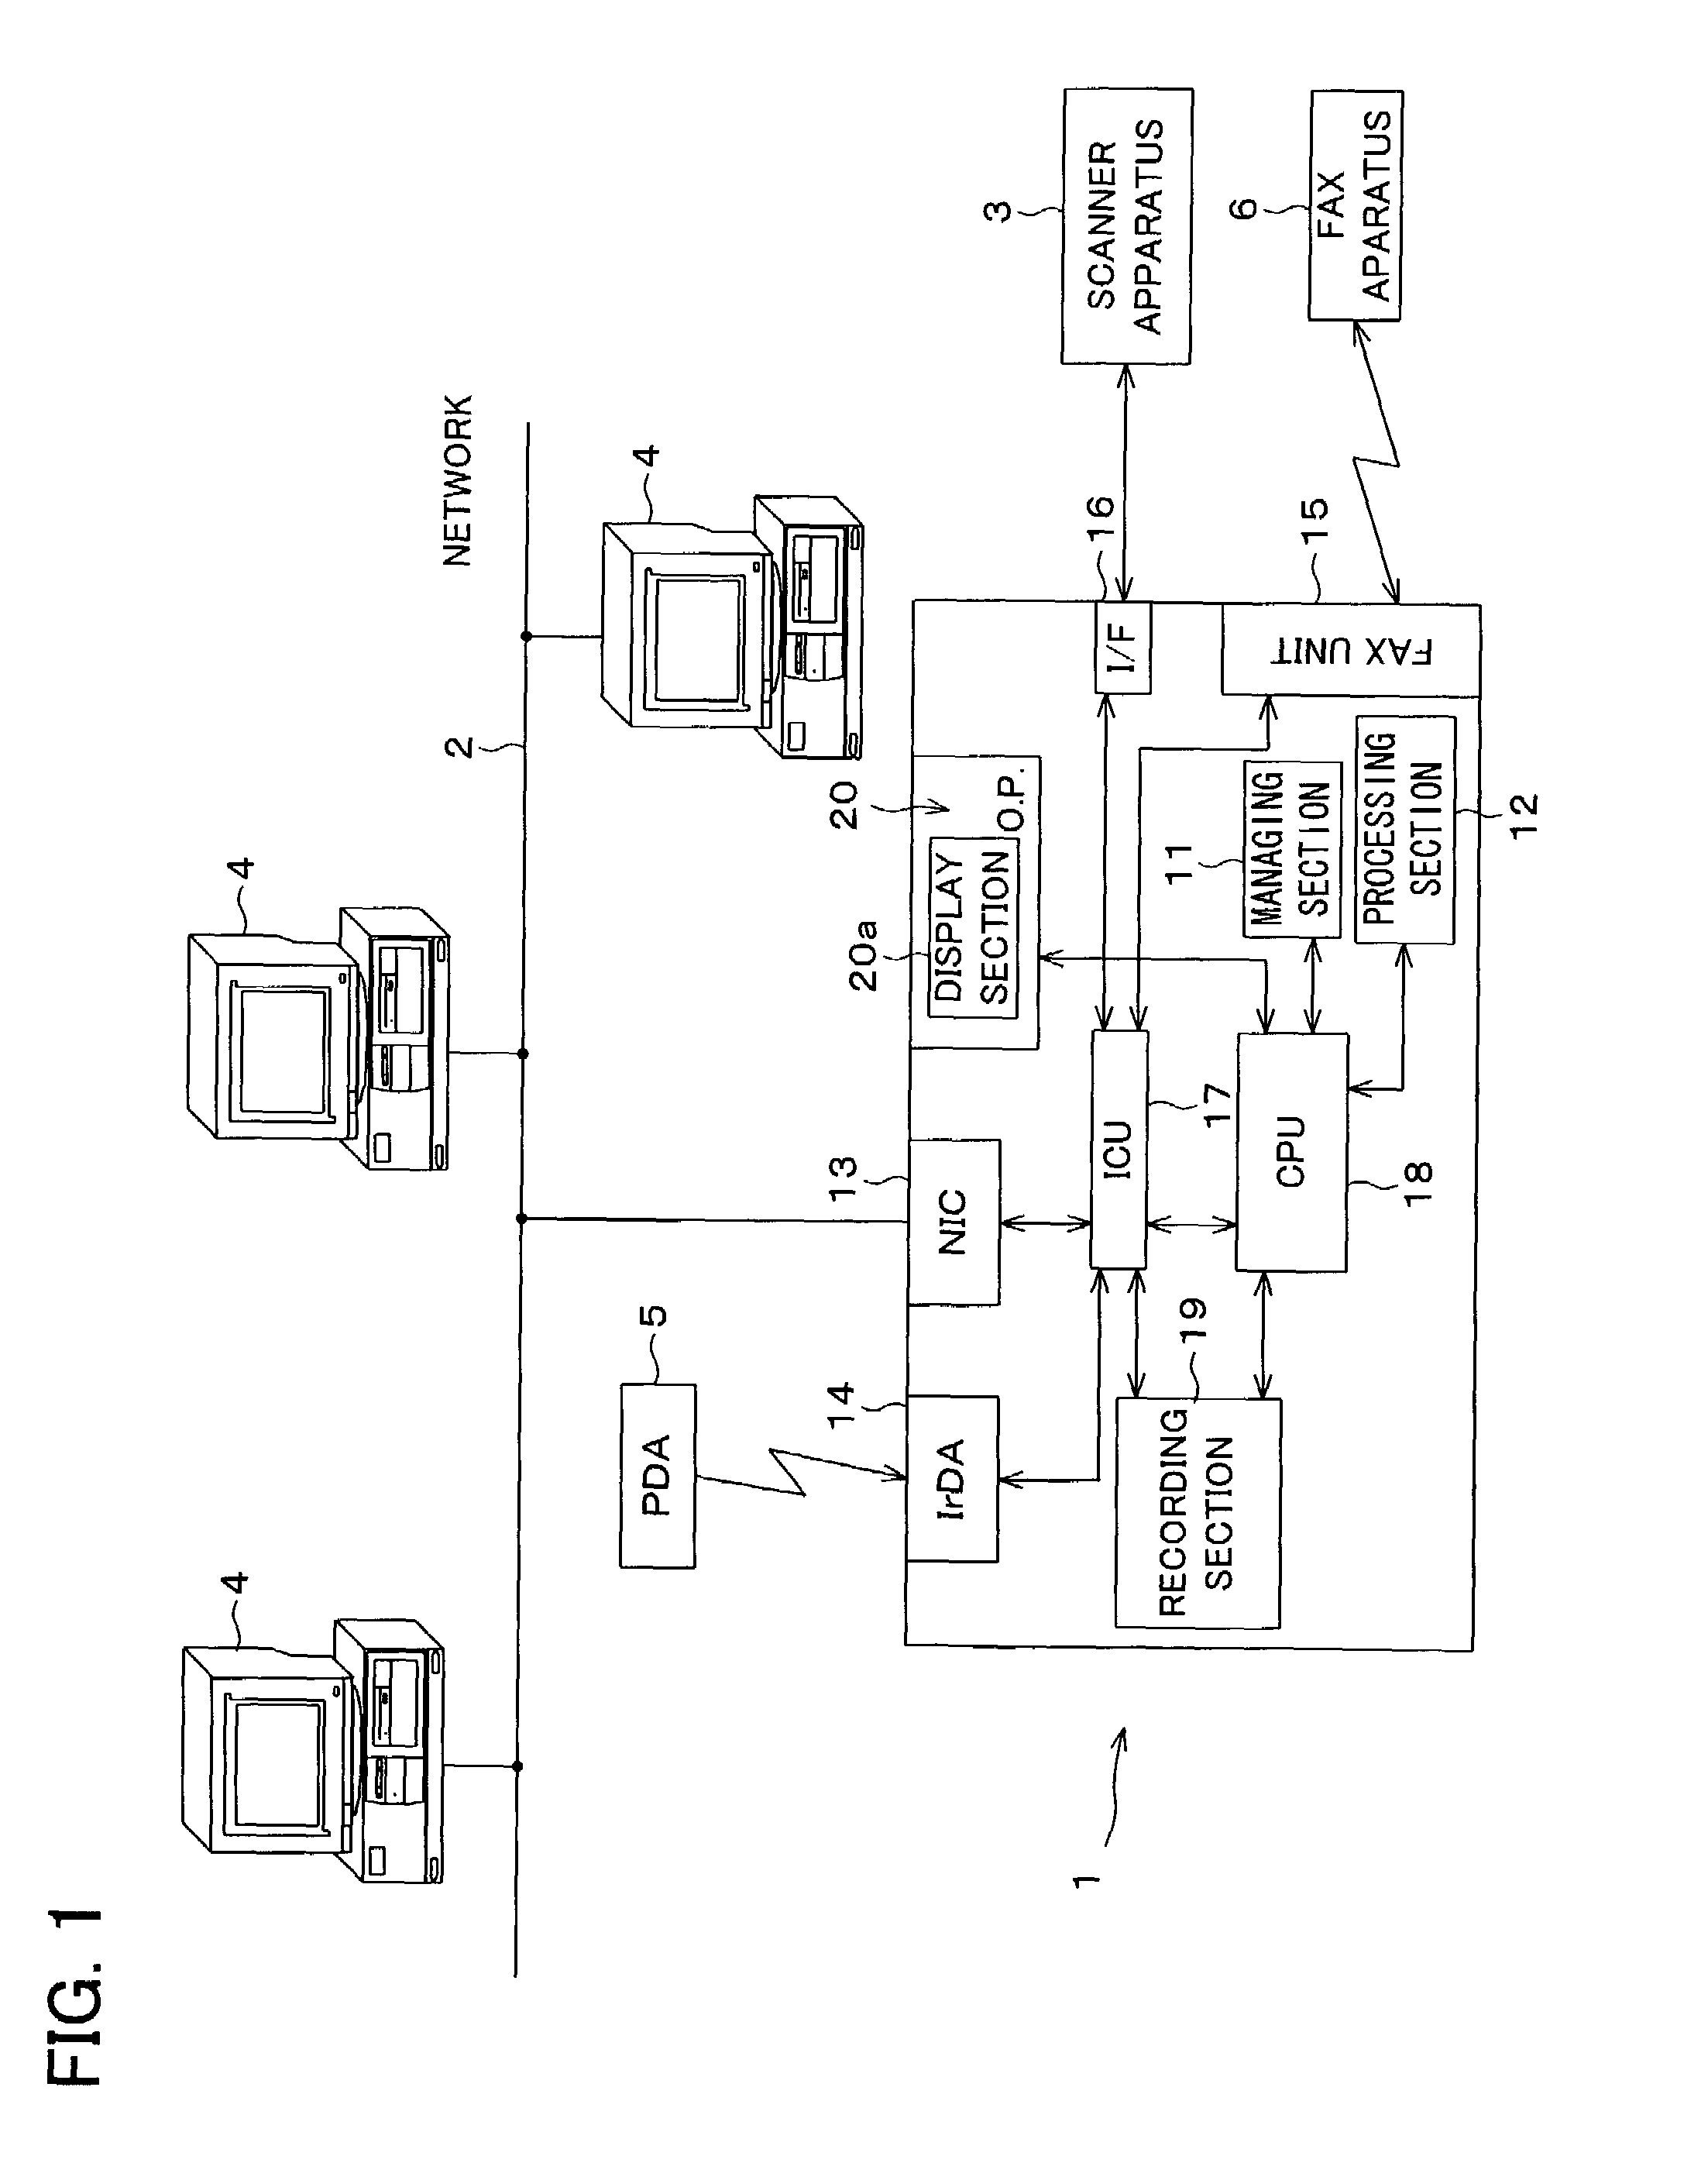 Electrically controlled apparatus